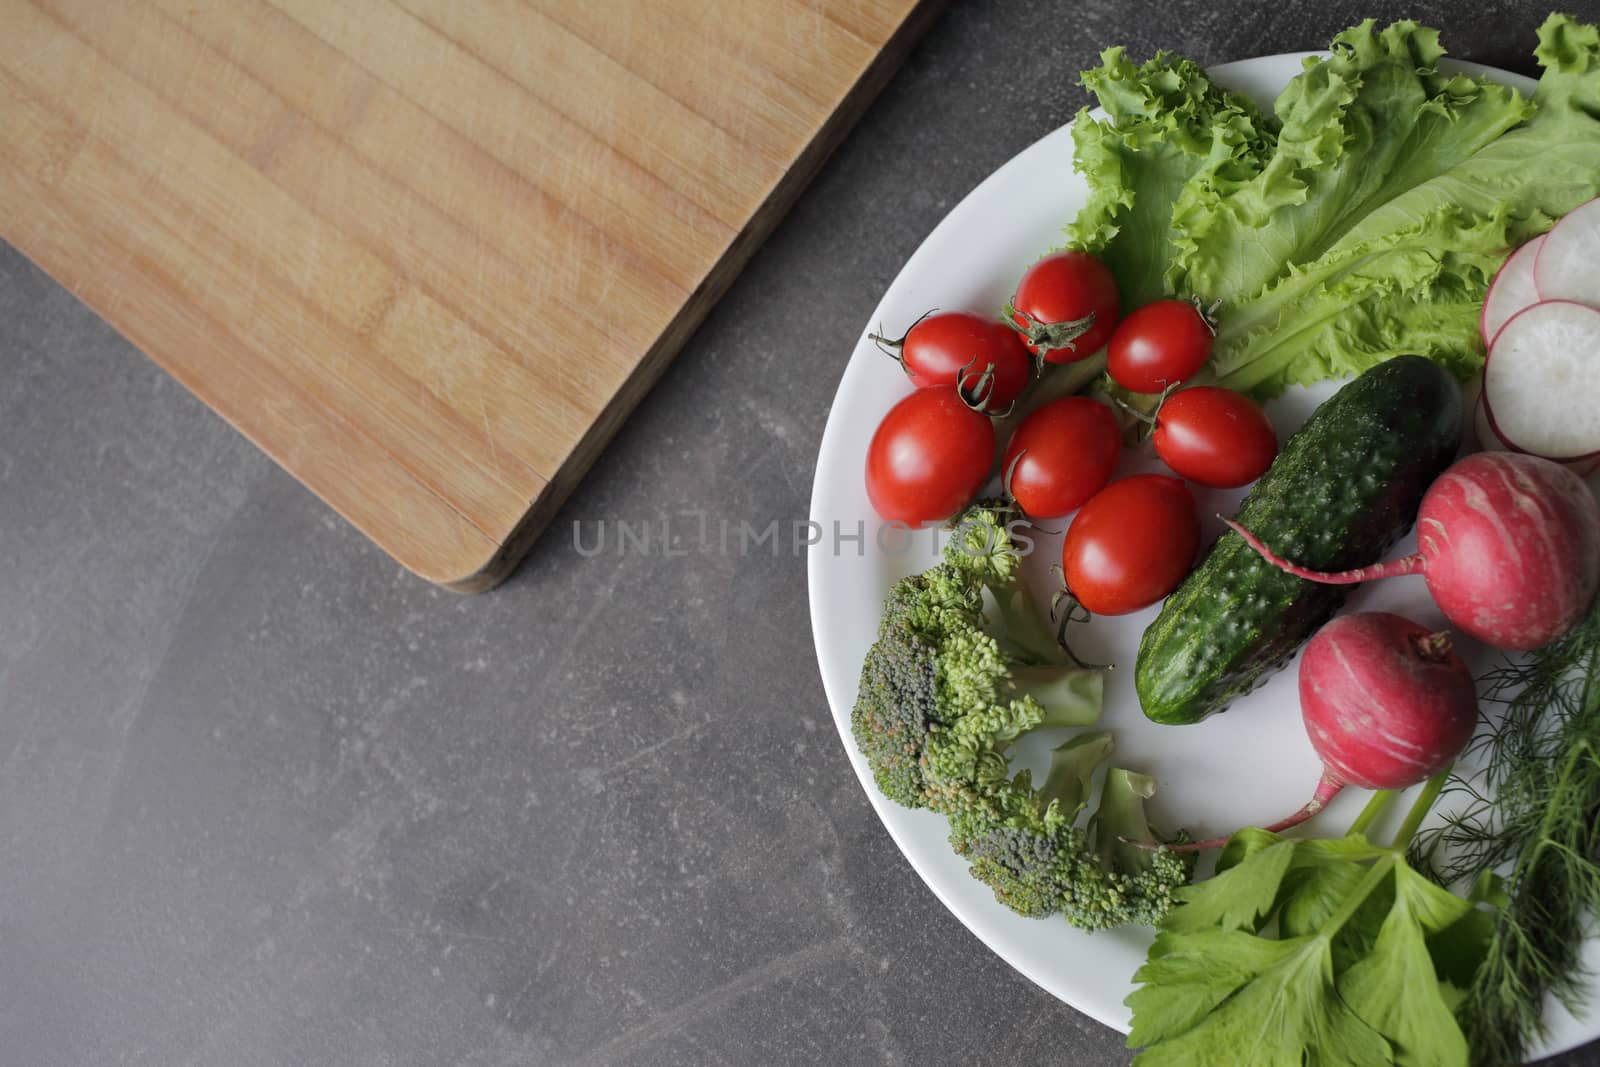 Fresh vegetables in a white plate on a gray table. Tomatoes, cucumber, lettuce, broccoli, radish, cutting board